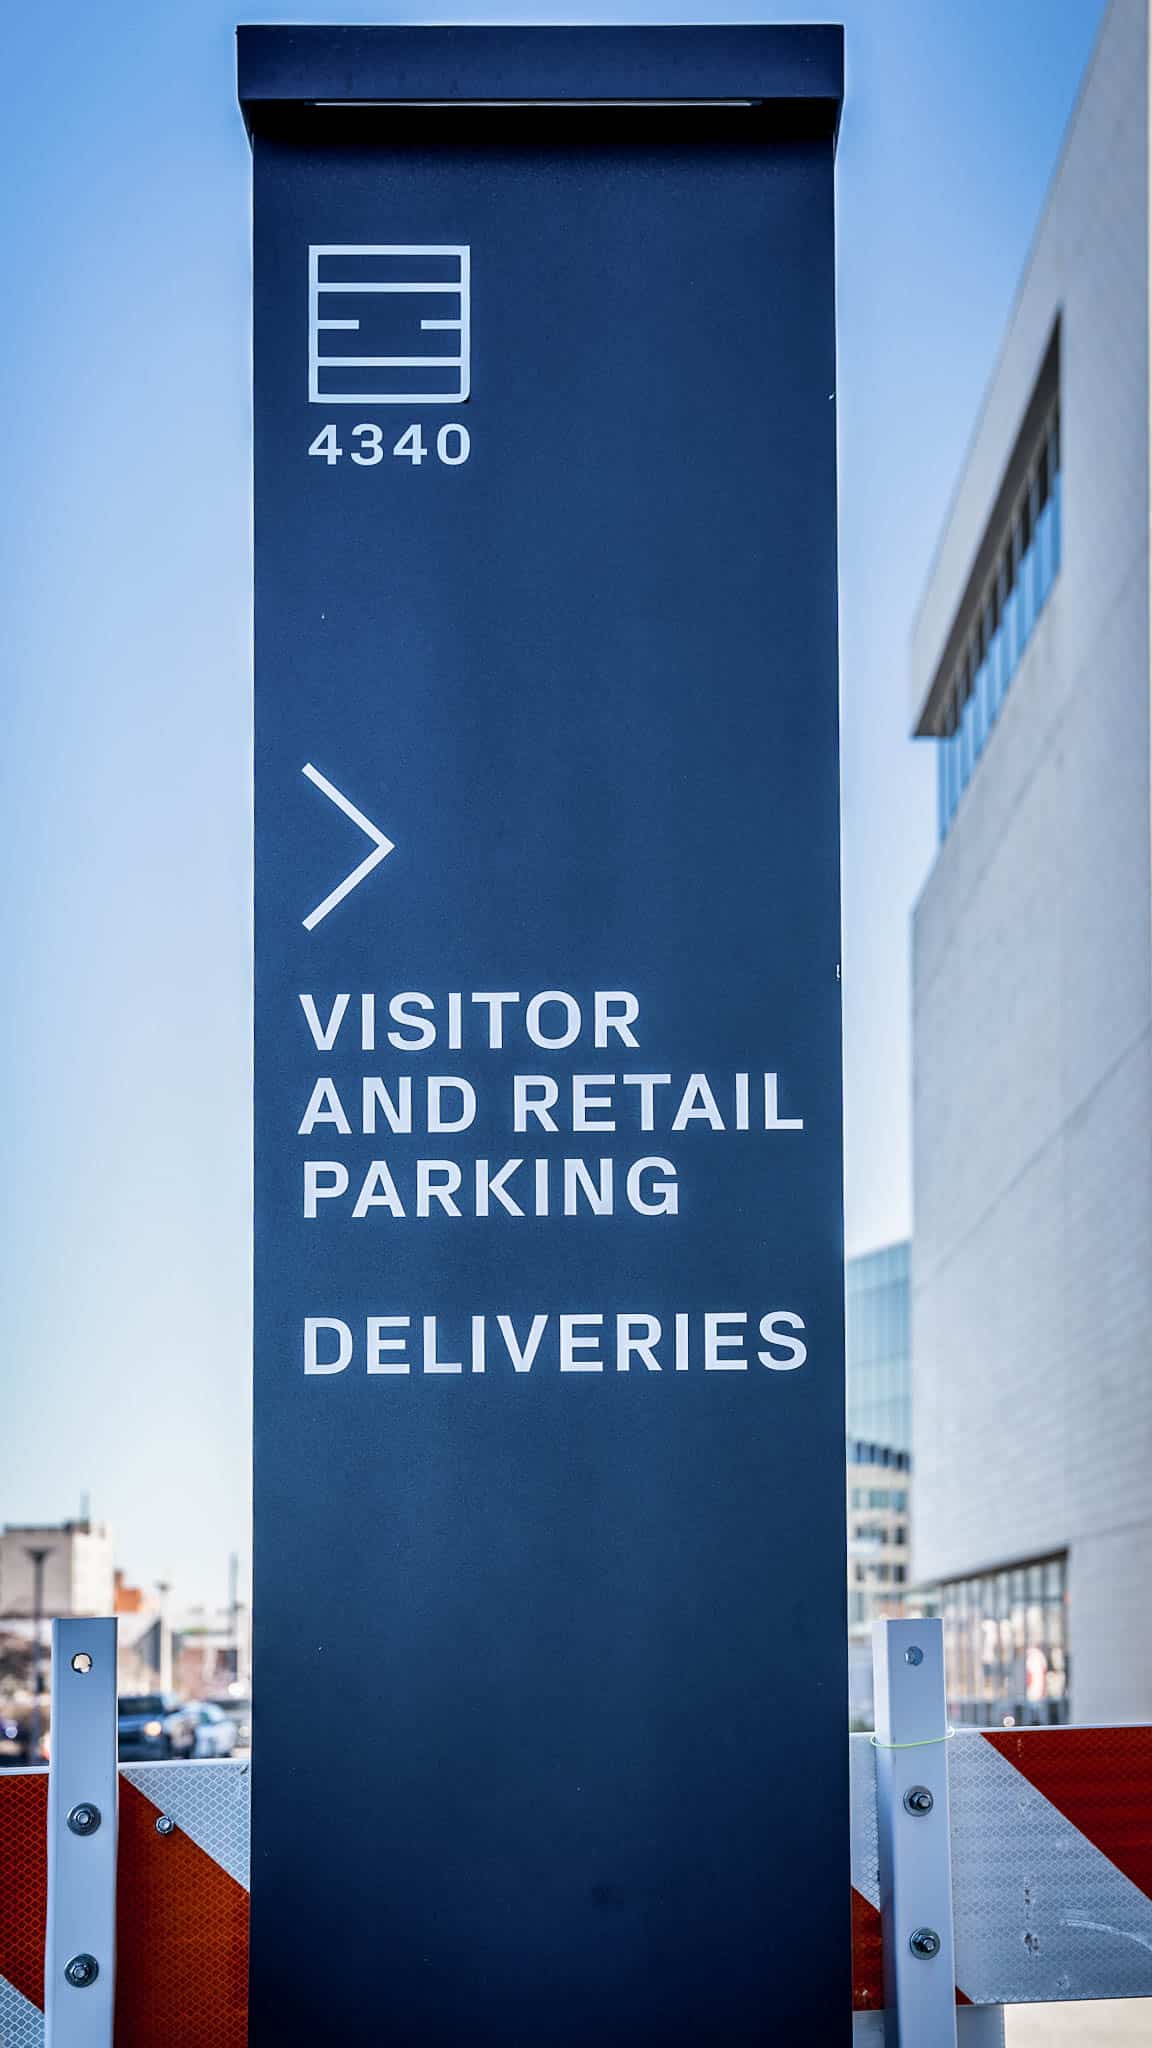 Panel wayfinding sign in blue with BioSTL logo for parking directions